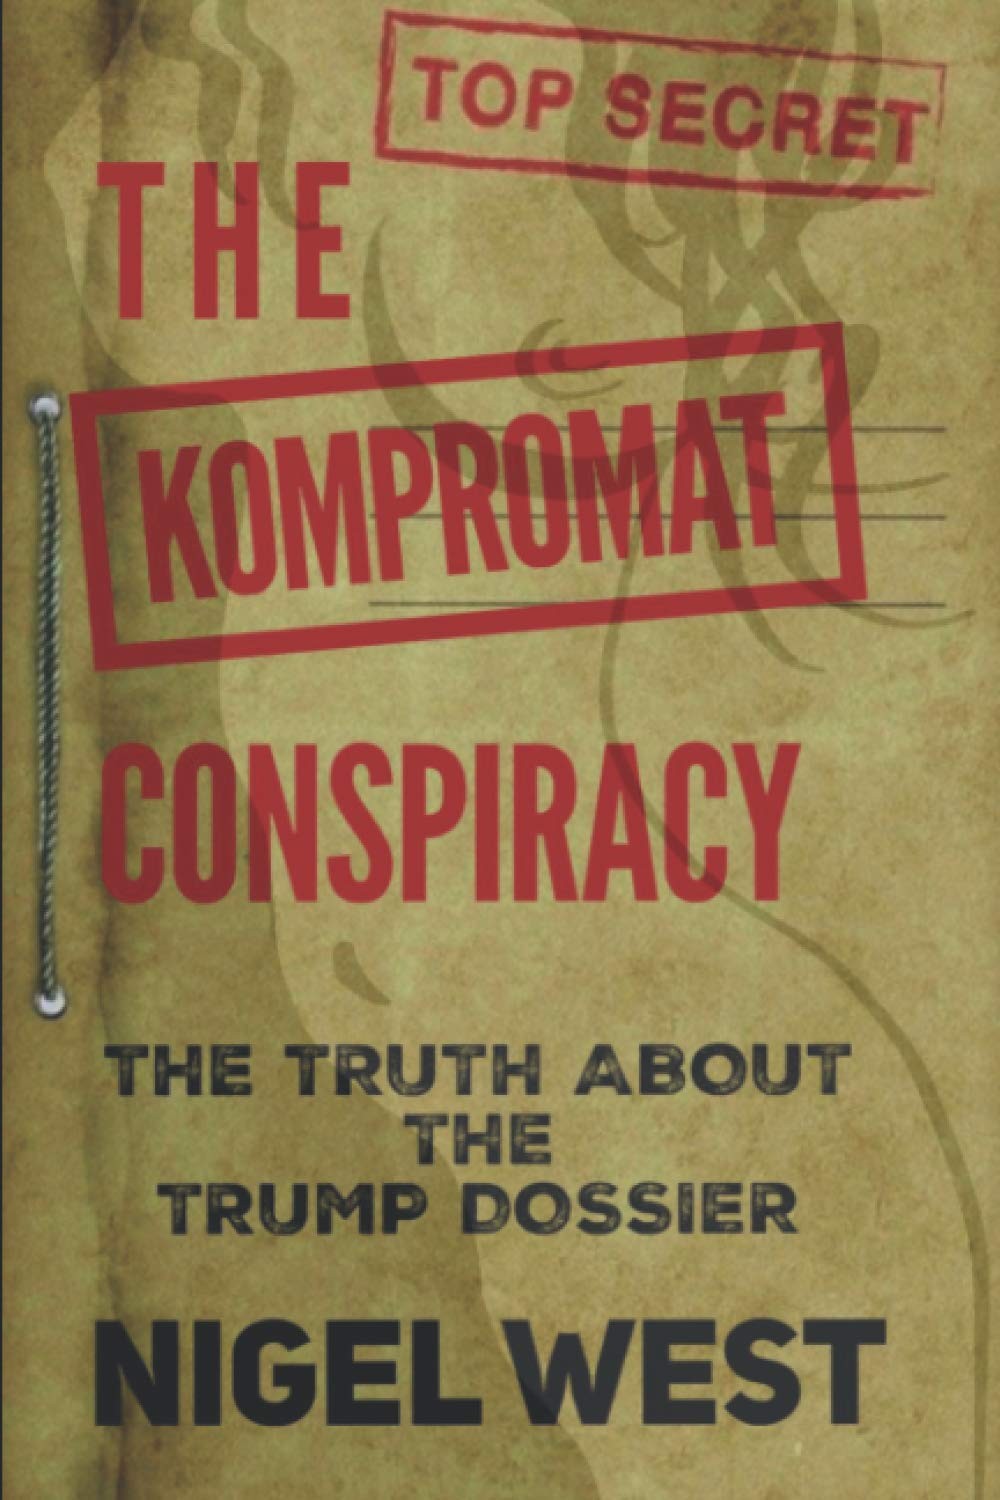 The Kompromat Conspiracy: The Truth About the Trump Dossier